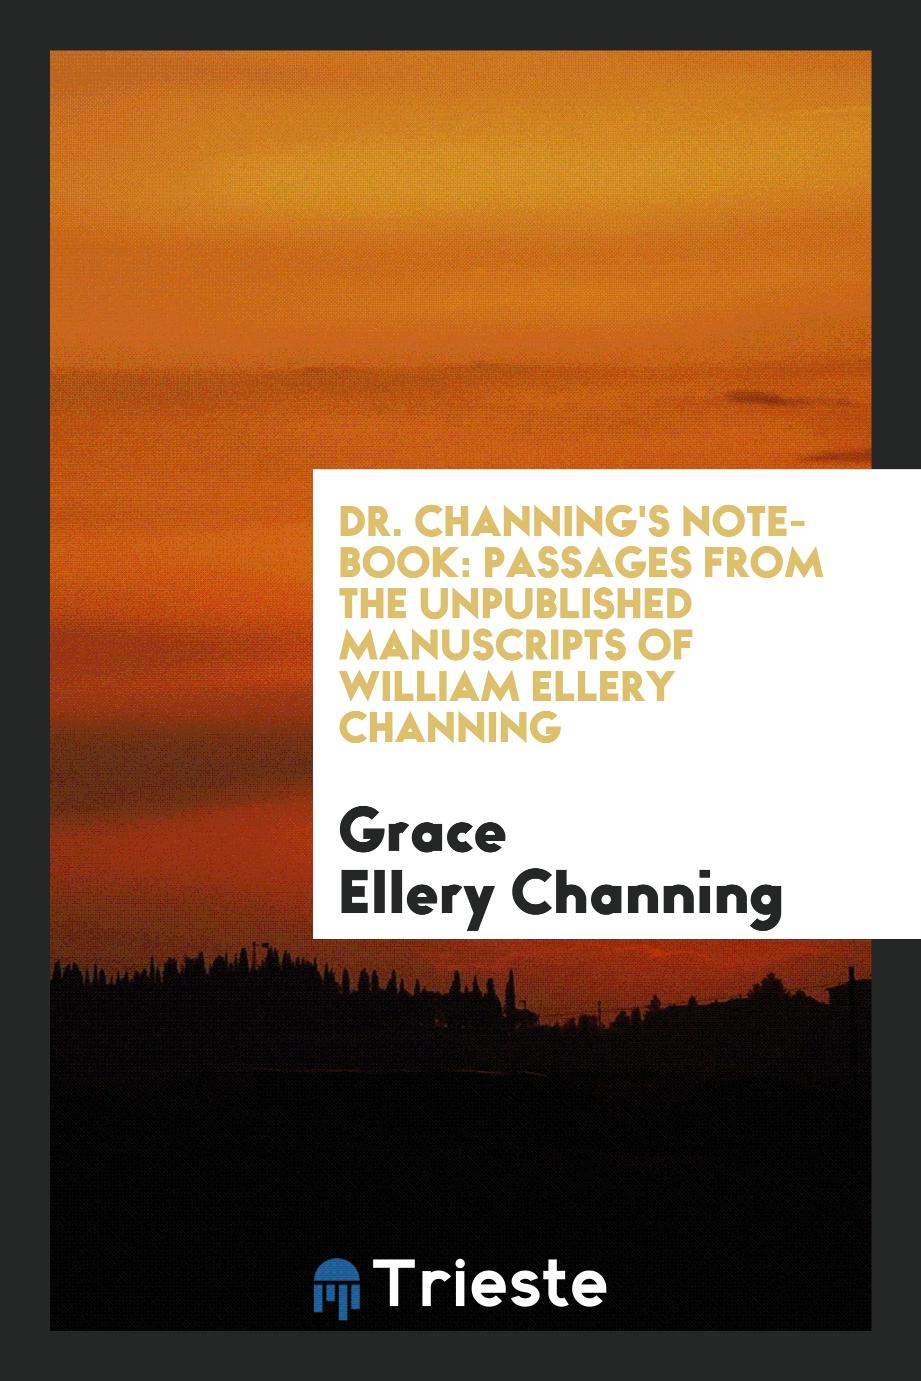 Dr. Channing's Note-Book: Passages from the Unpublished Manuscripts of William Ellery Channing